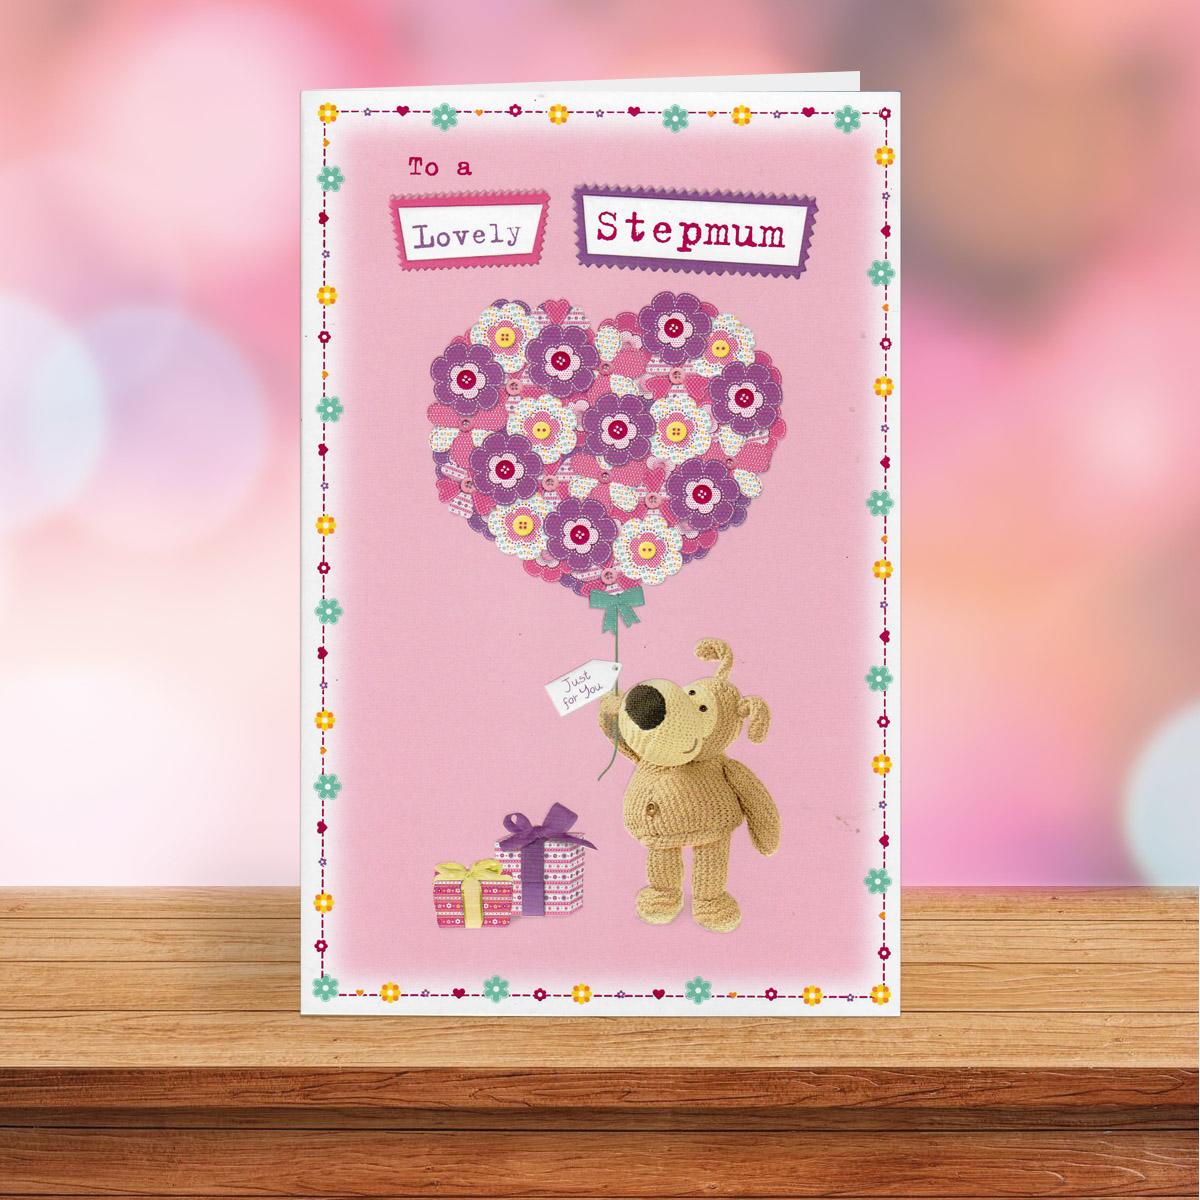 Boofle Stepmum Mothers Day Card Sitting On A Display Shelf